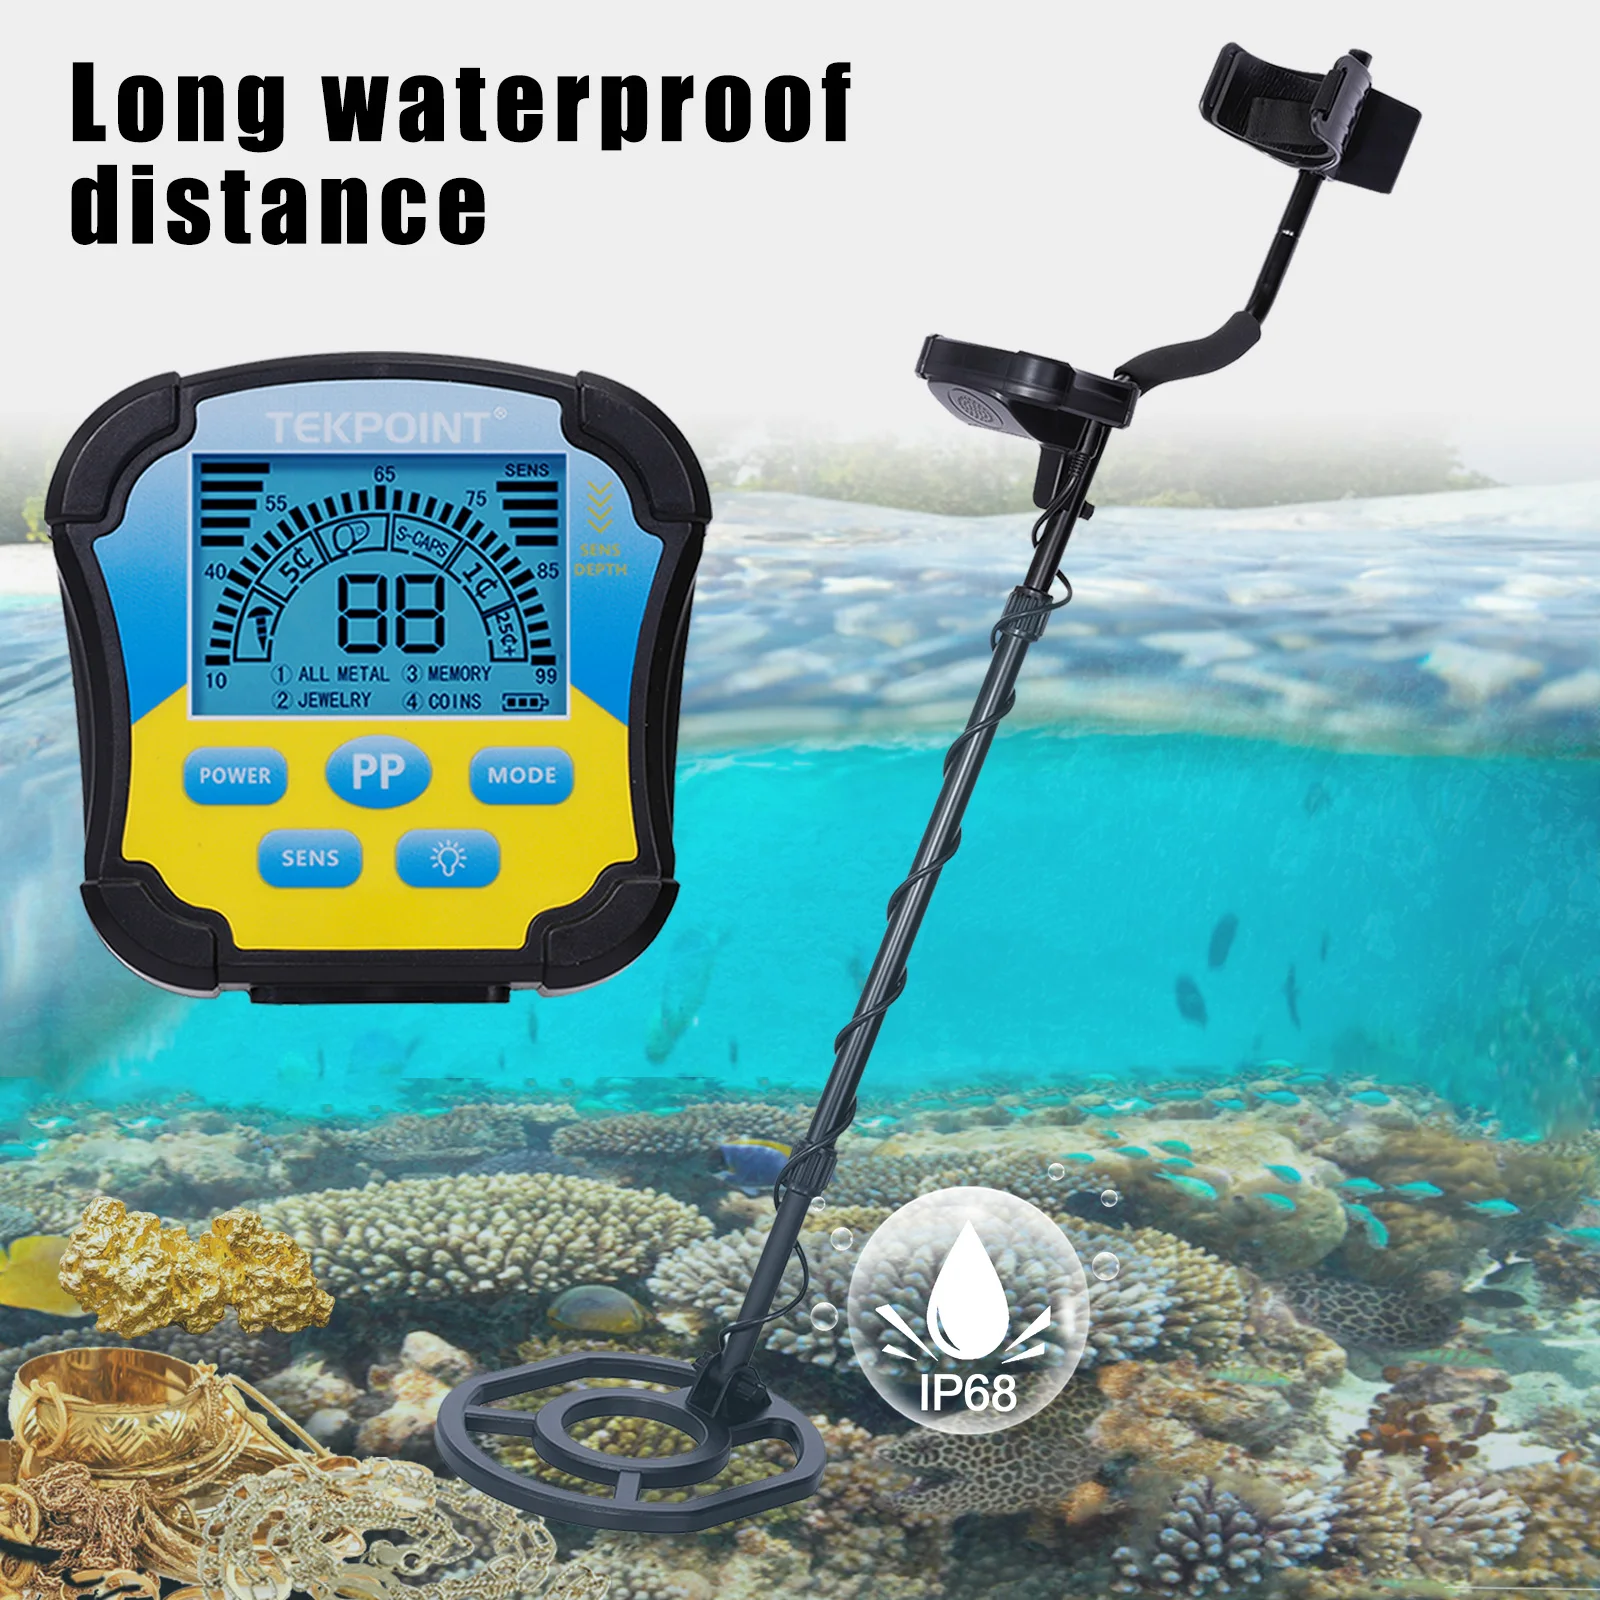 Metal Detector MD8030 Lightweight Gold Finder 10 IP68 Waterproof Search Coil 4 Modes Professional High Accuracy